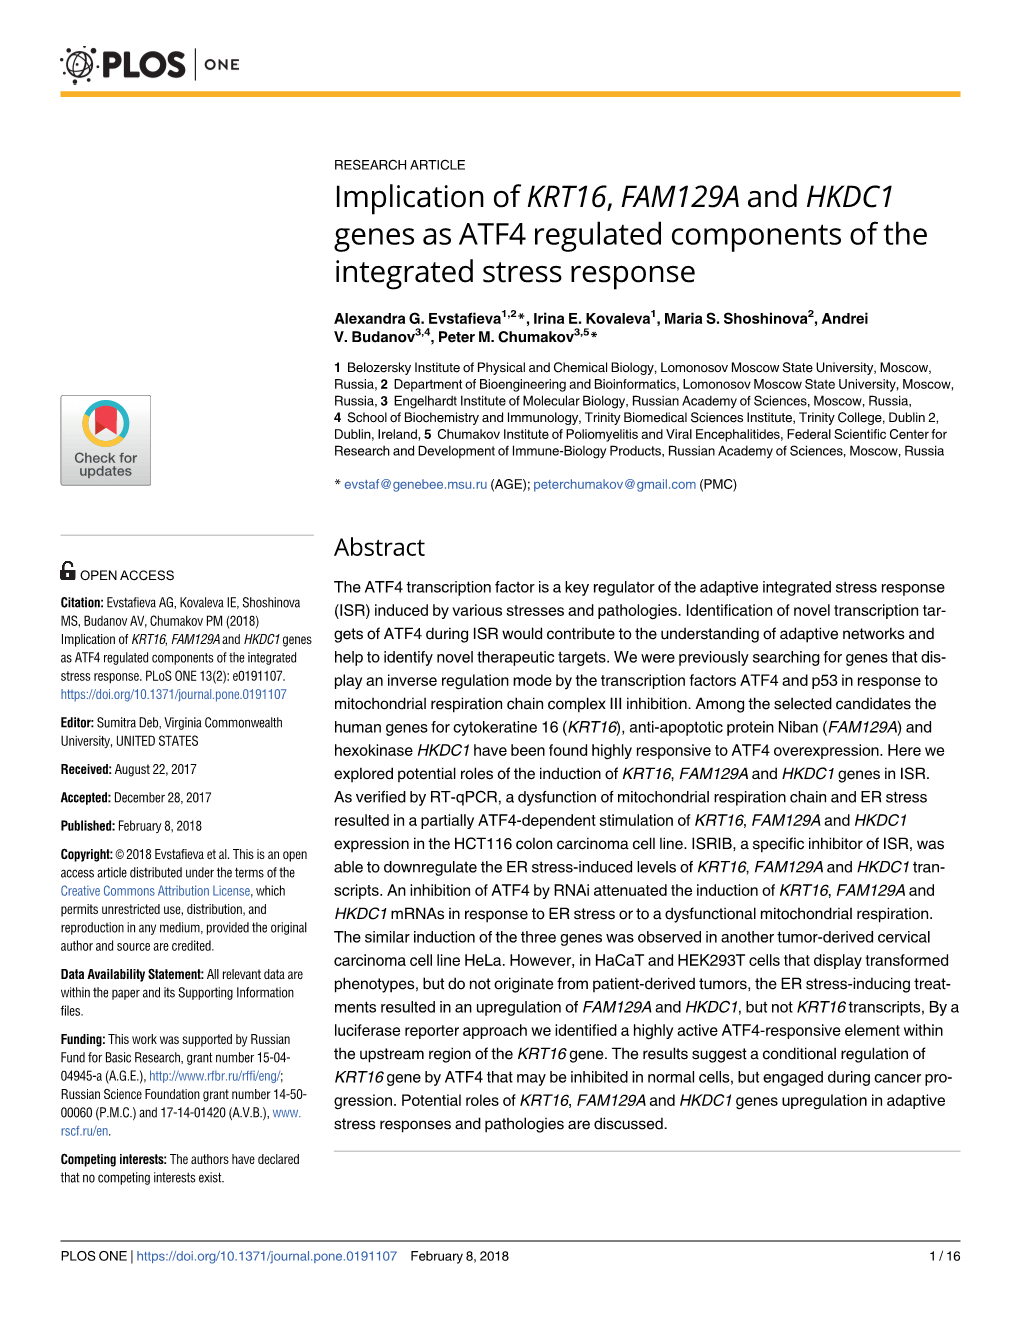 Implication of KRT16, FAM129A and HKDC1 Genes As ATF4 Regulated Components of the Integrated Stress Response